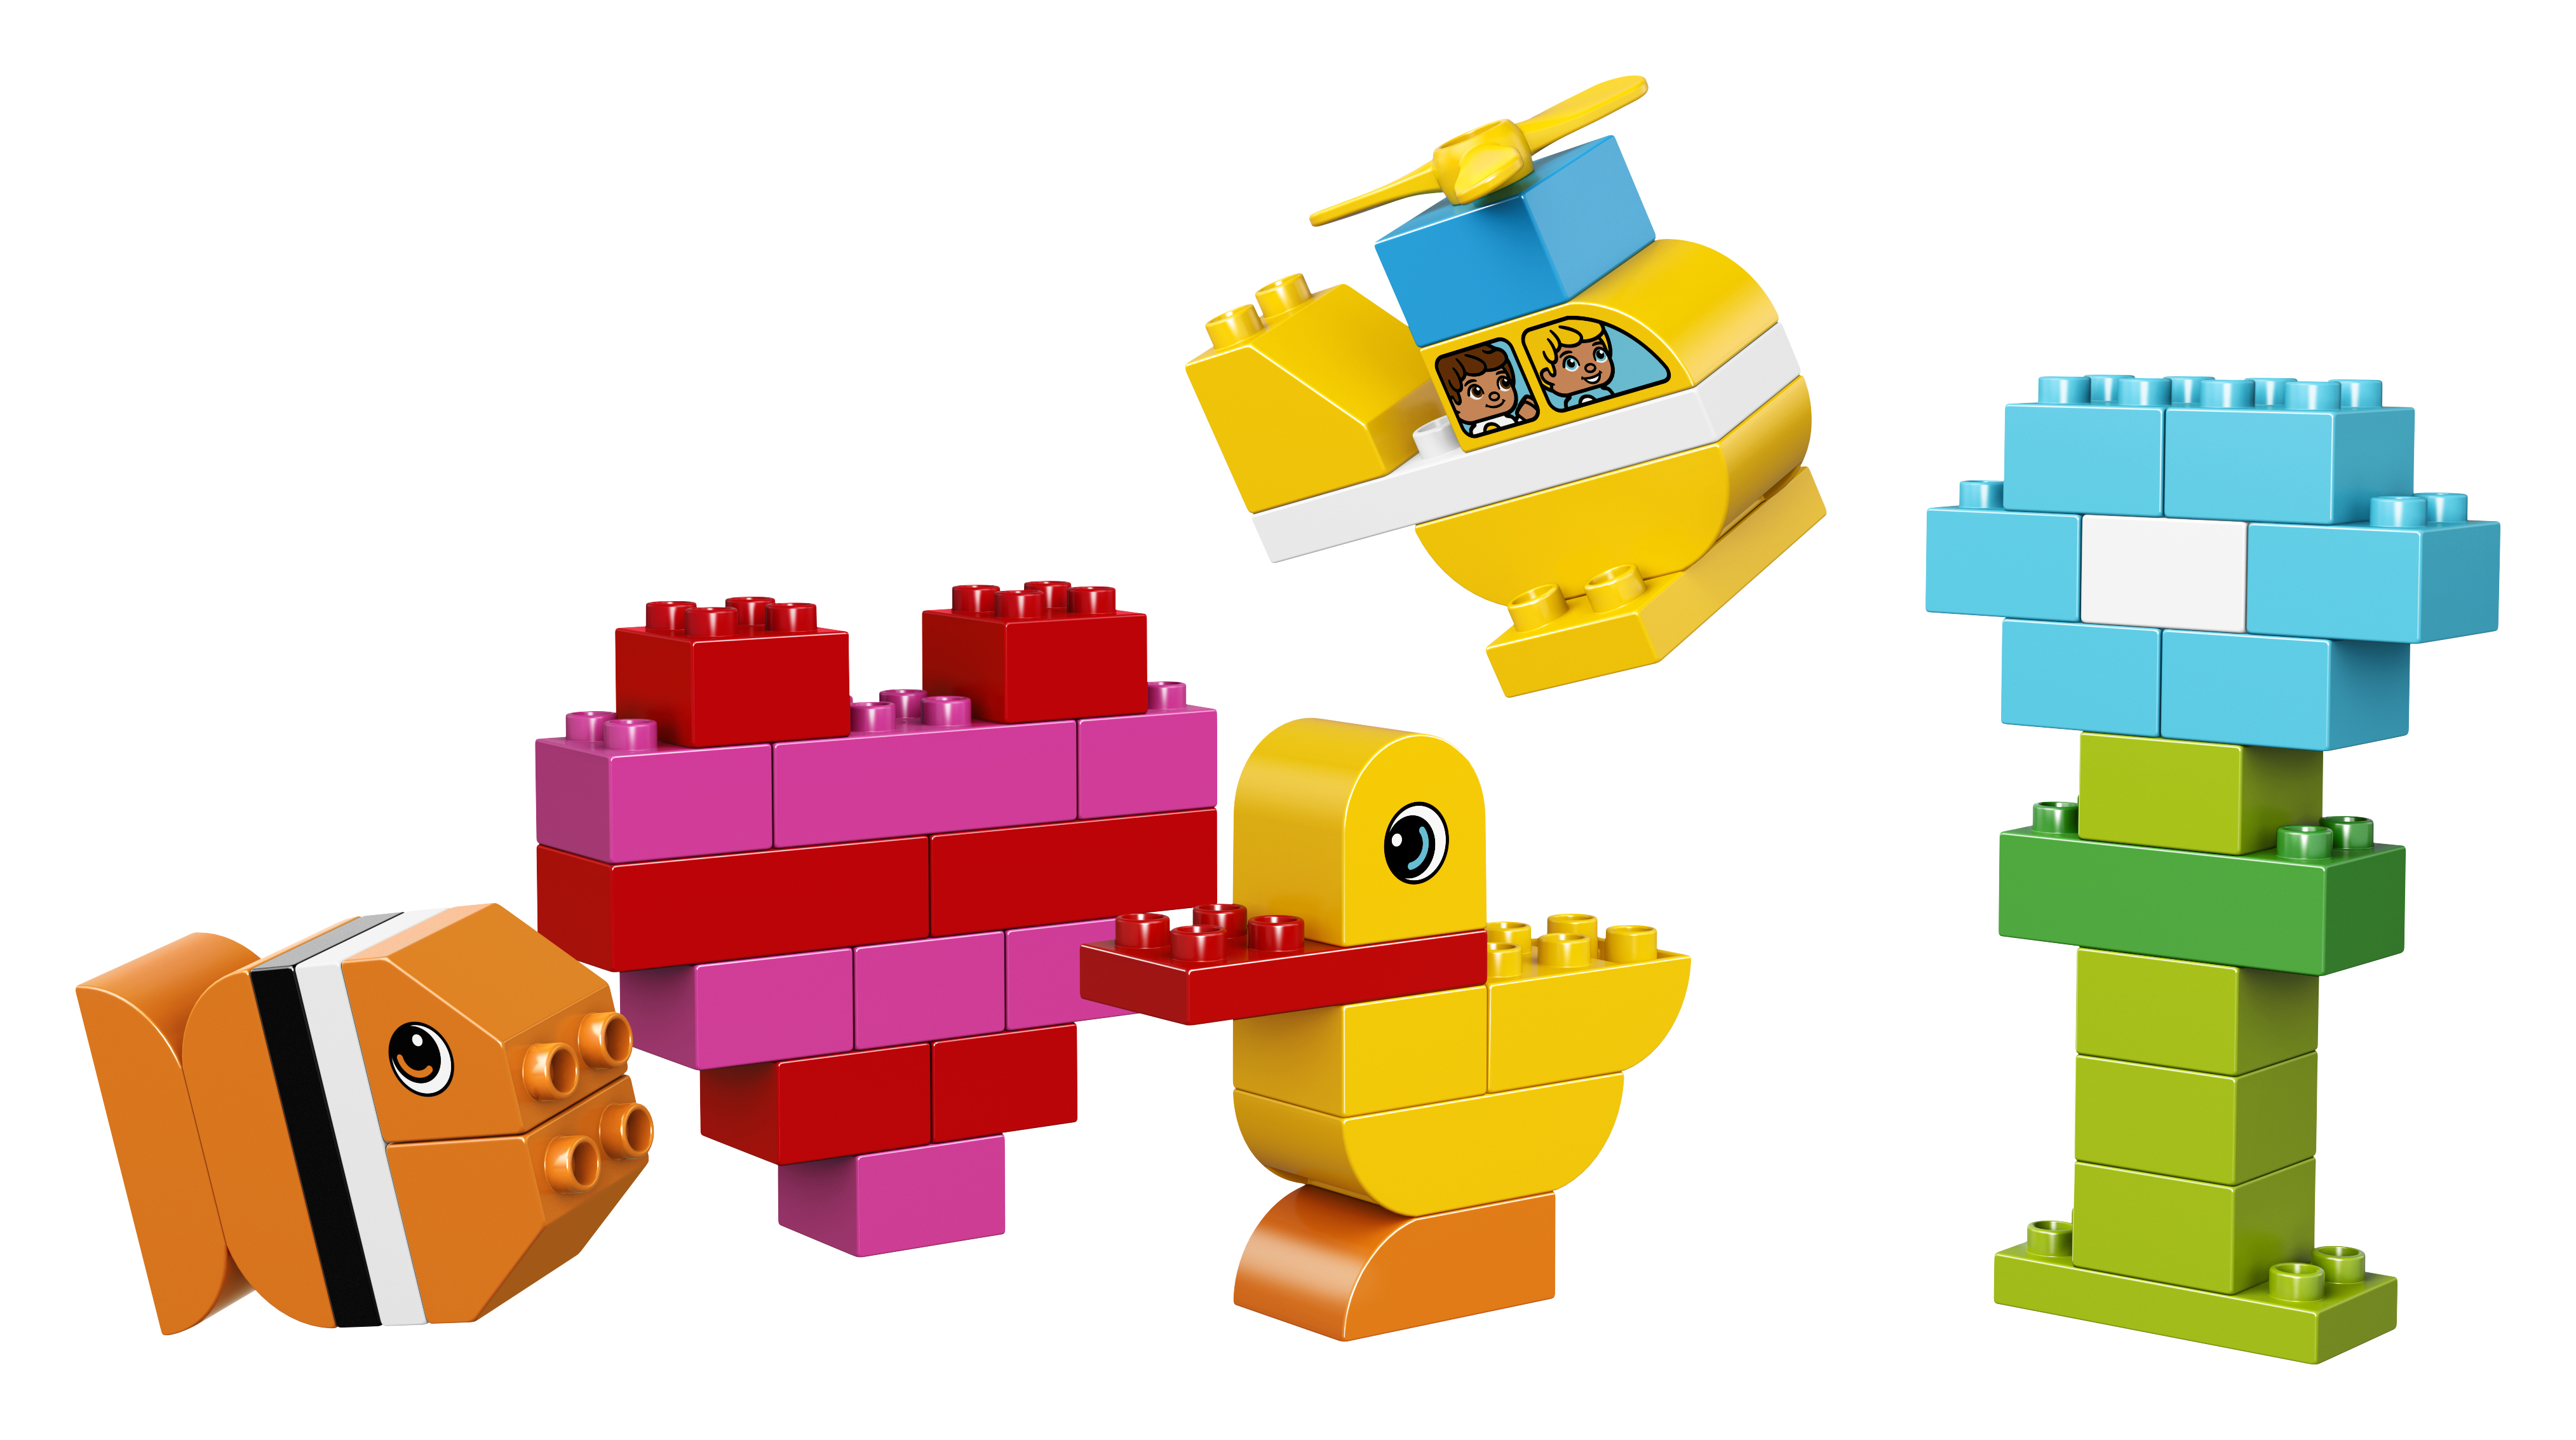 LEGO DUPLO My First Bricks 10848 Building Set (80 Pieces) - image 2 of 6